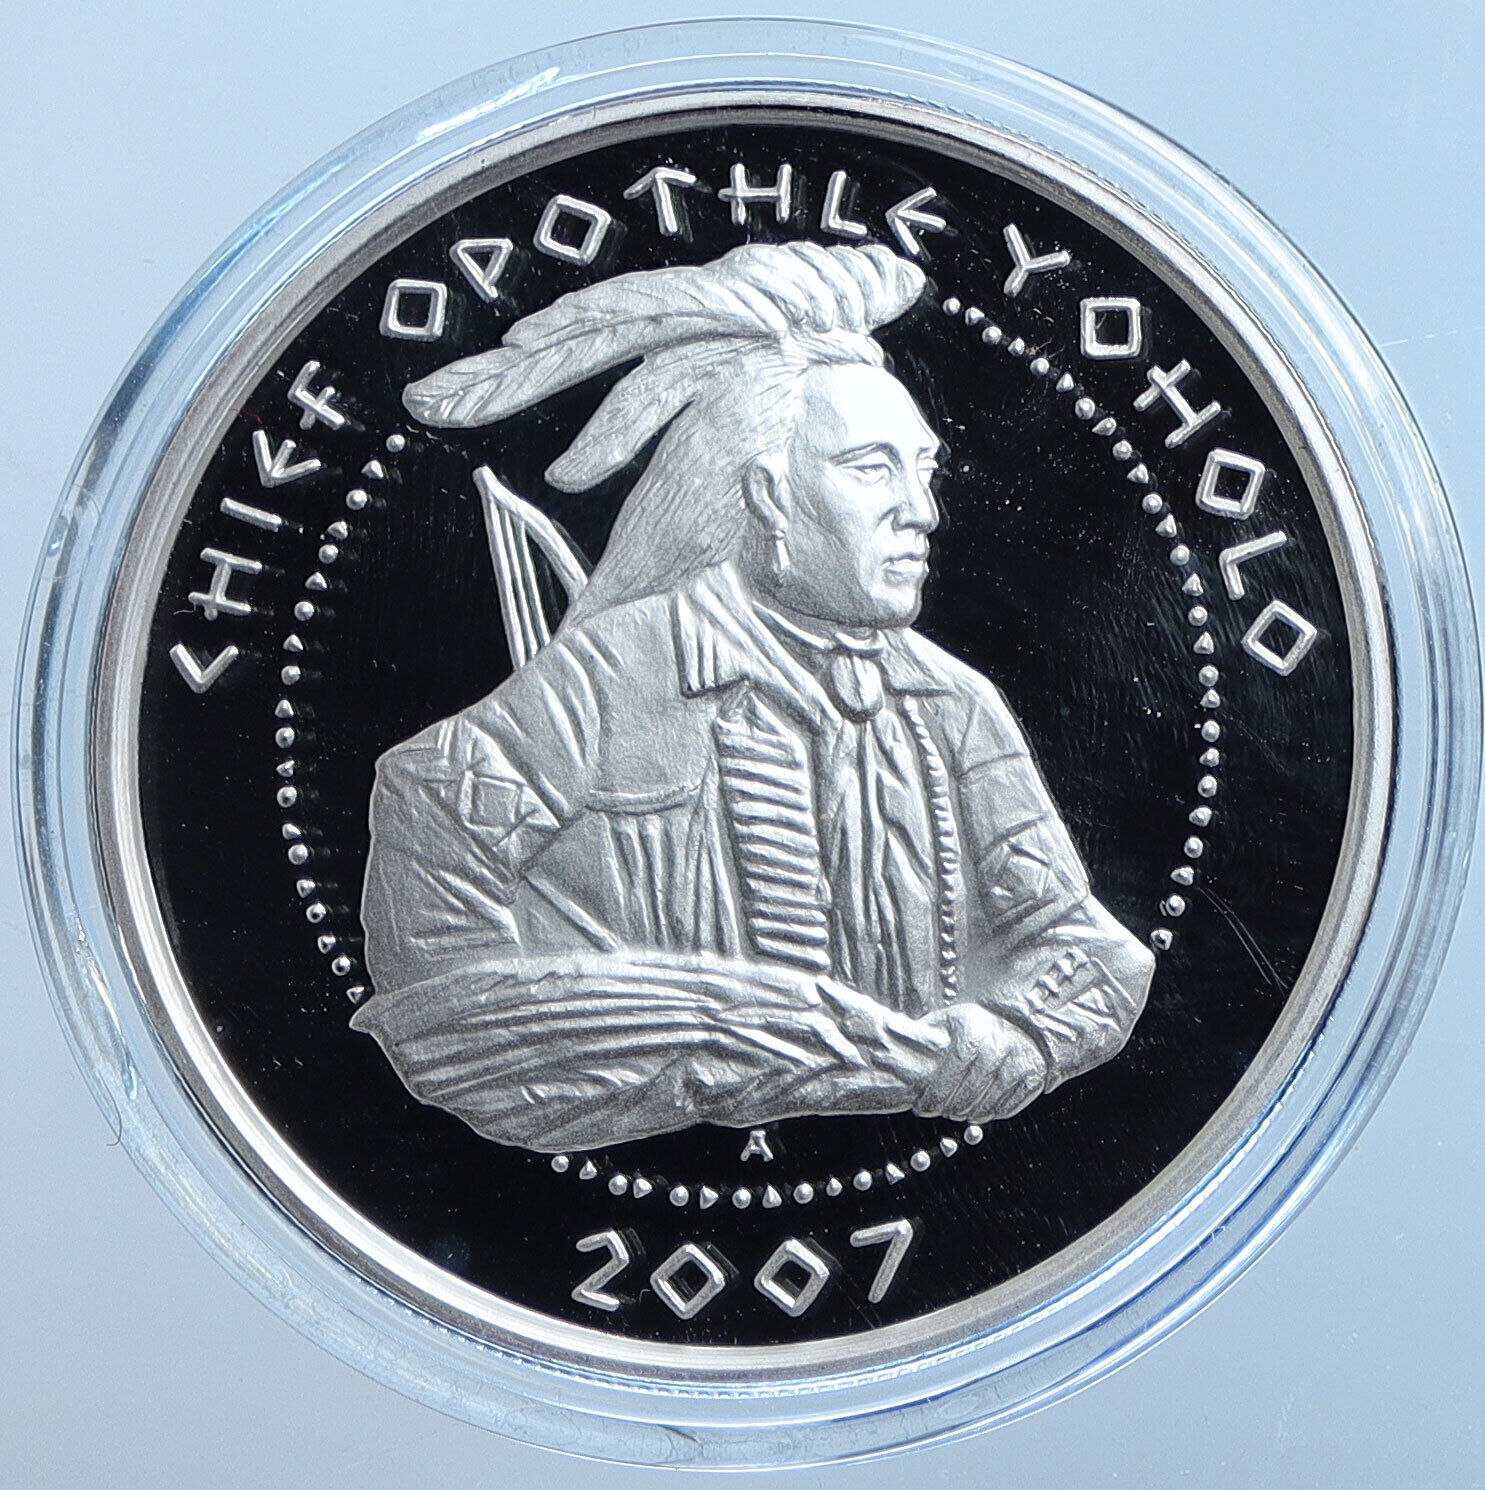 2007 US Poarch Creek Indians CHIEF YOHOLO Old Proof Silver Dollar Coin i114601